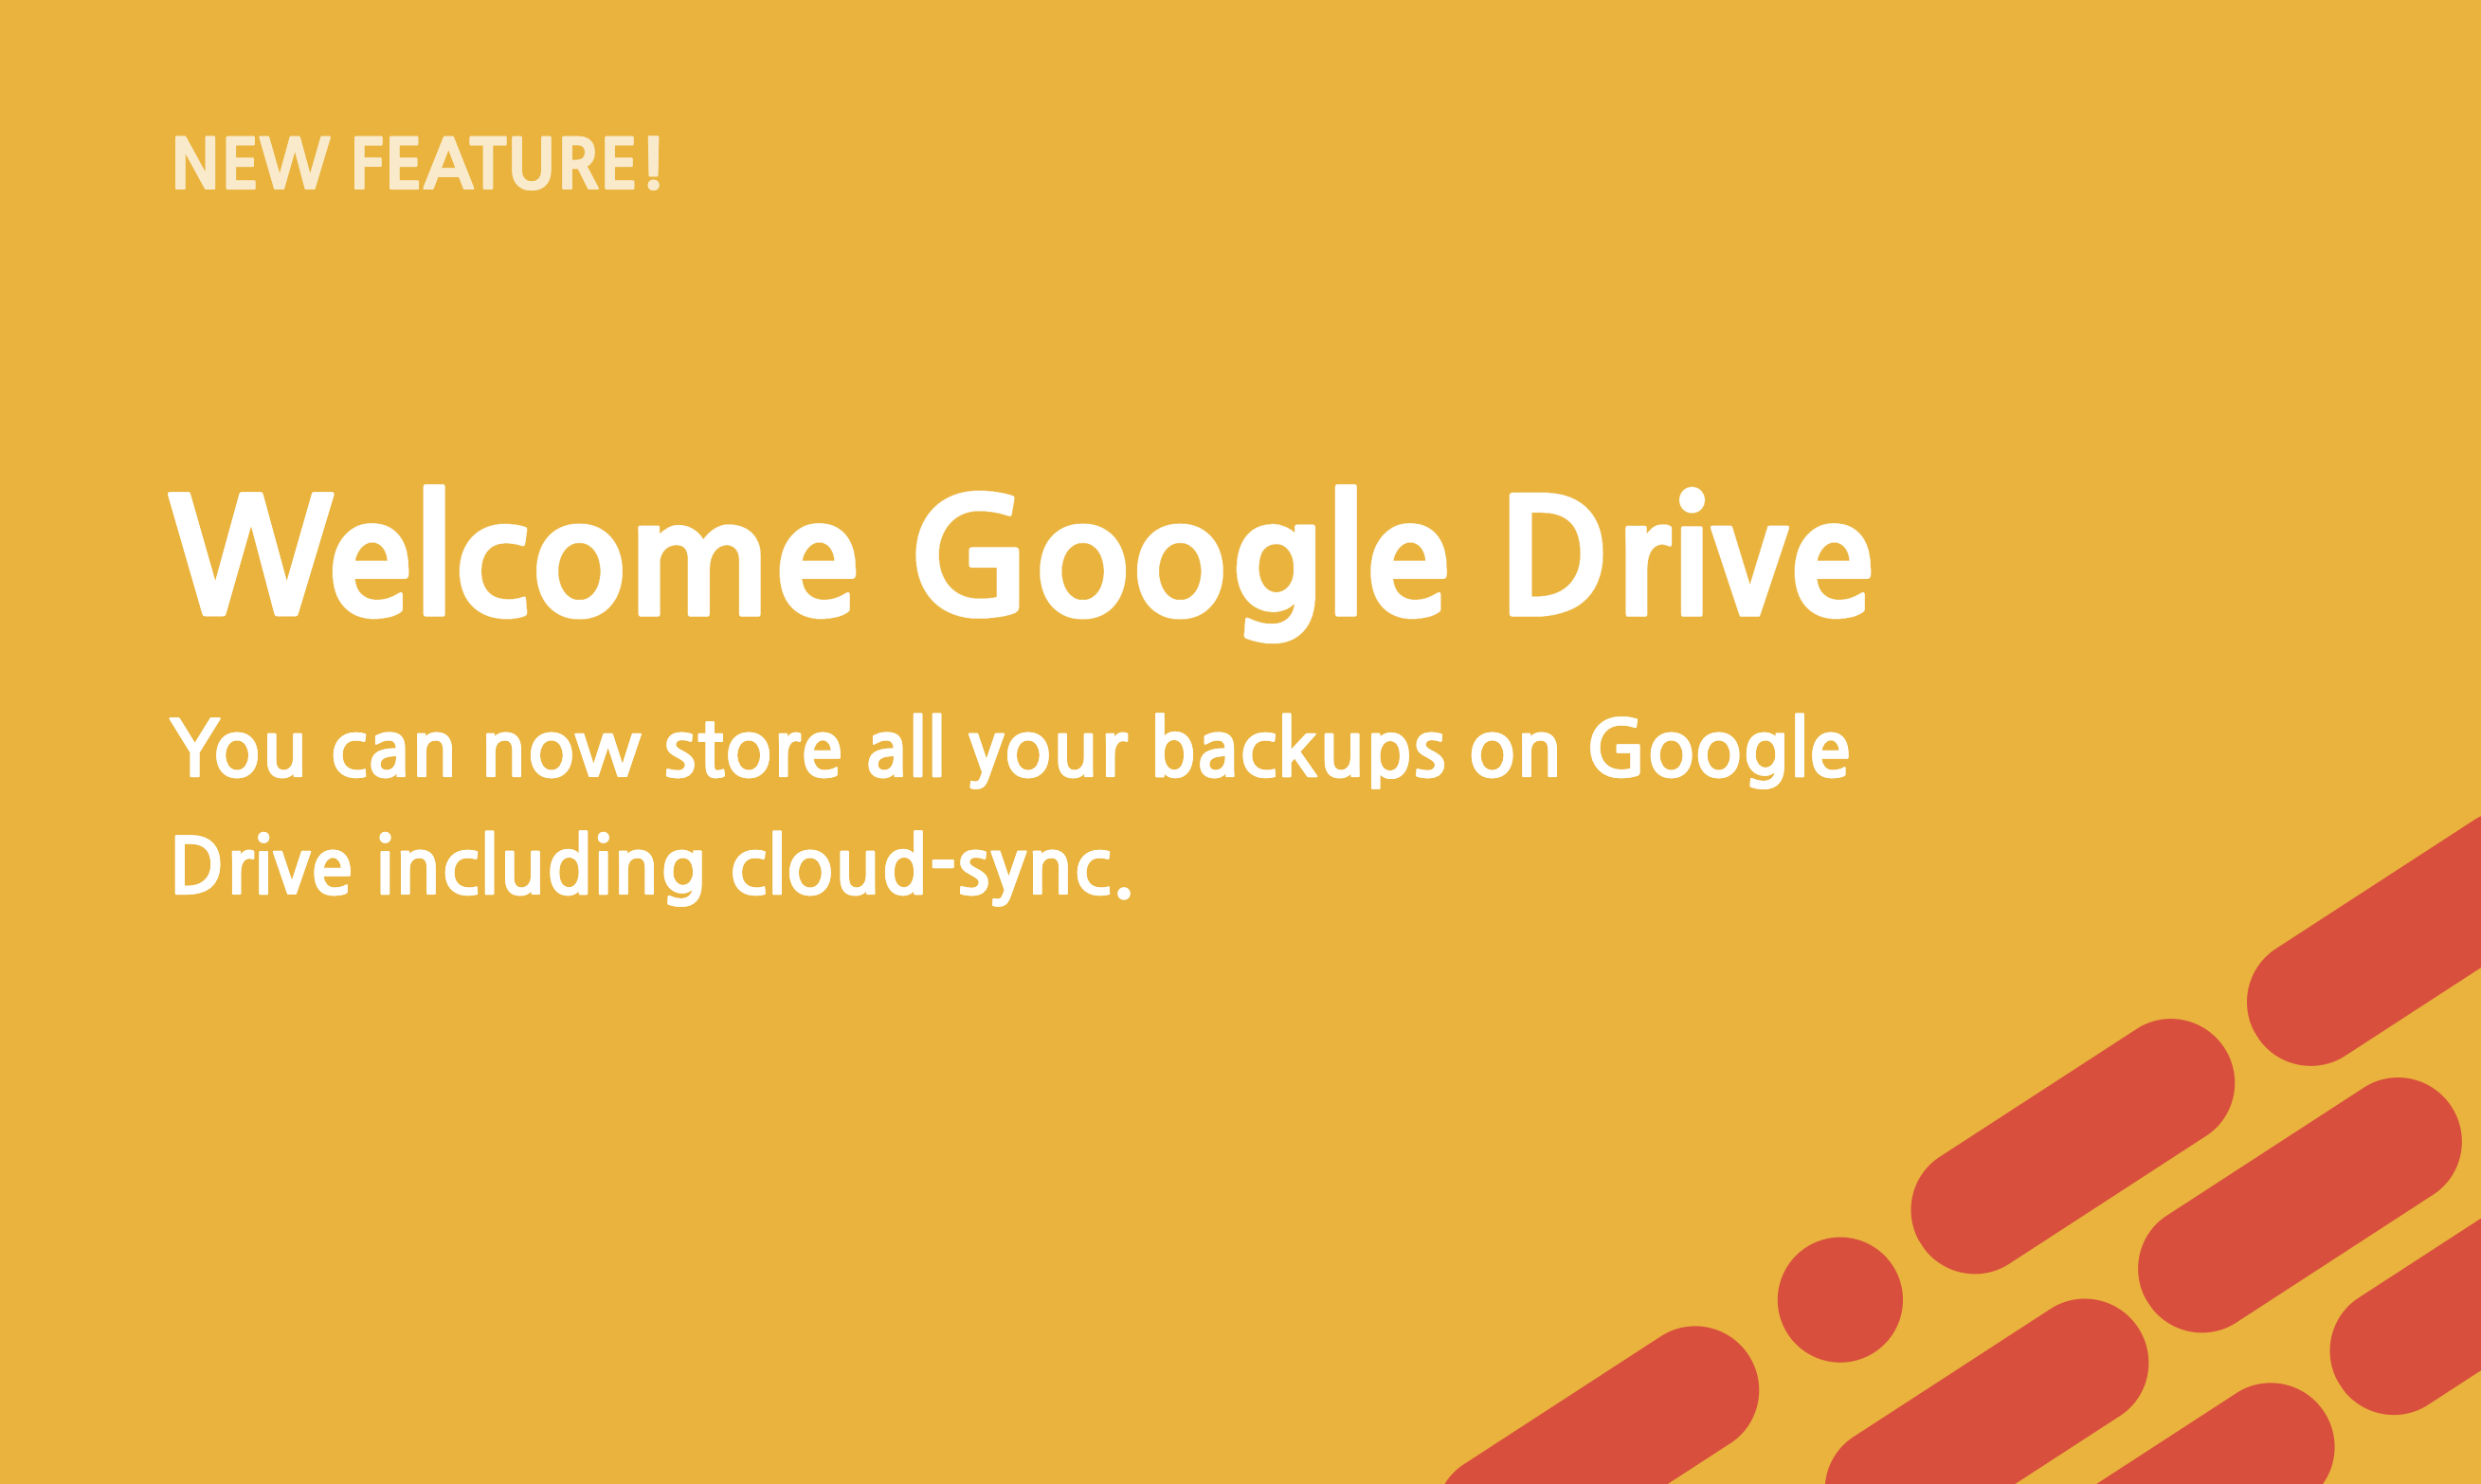 Use Google Drive to store your backups